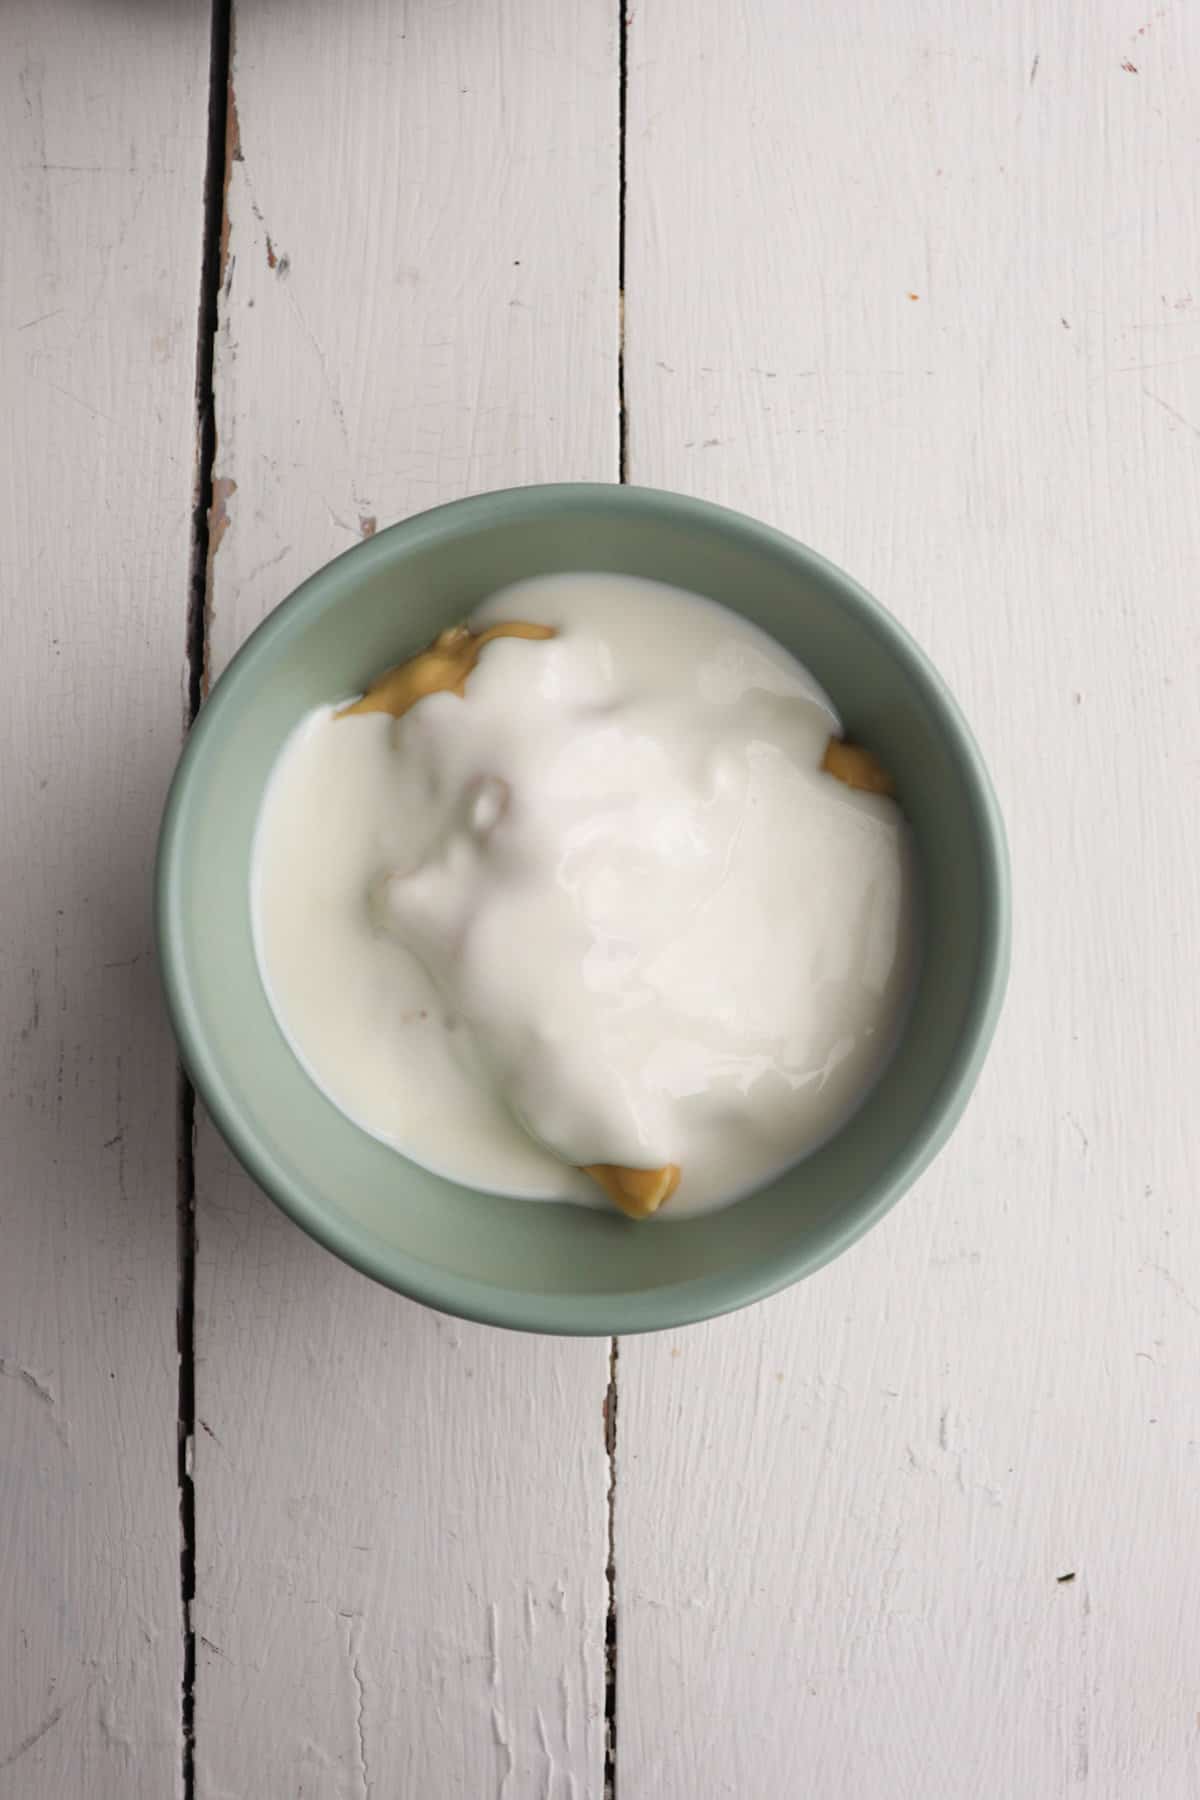 sour cream and cream soup in a small bowl.